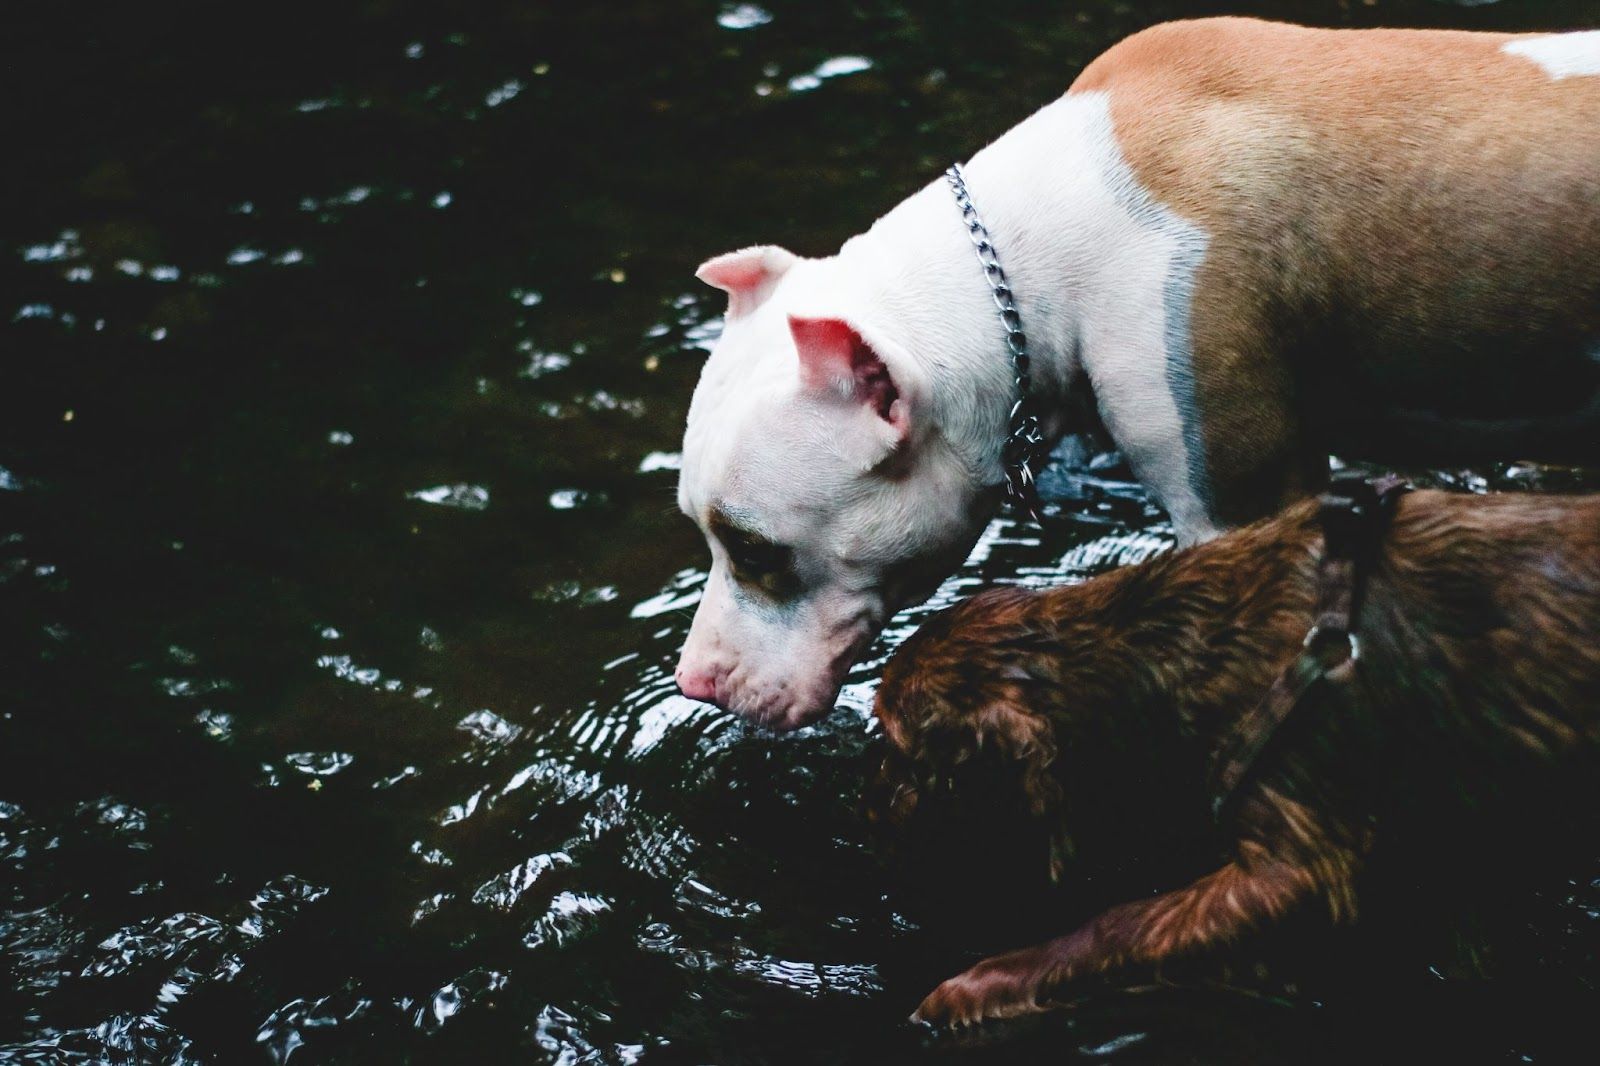 dog drinking water from a stream